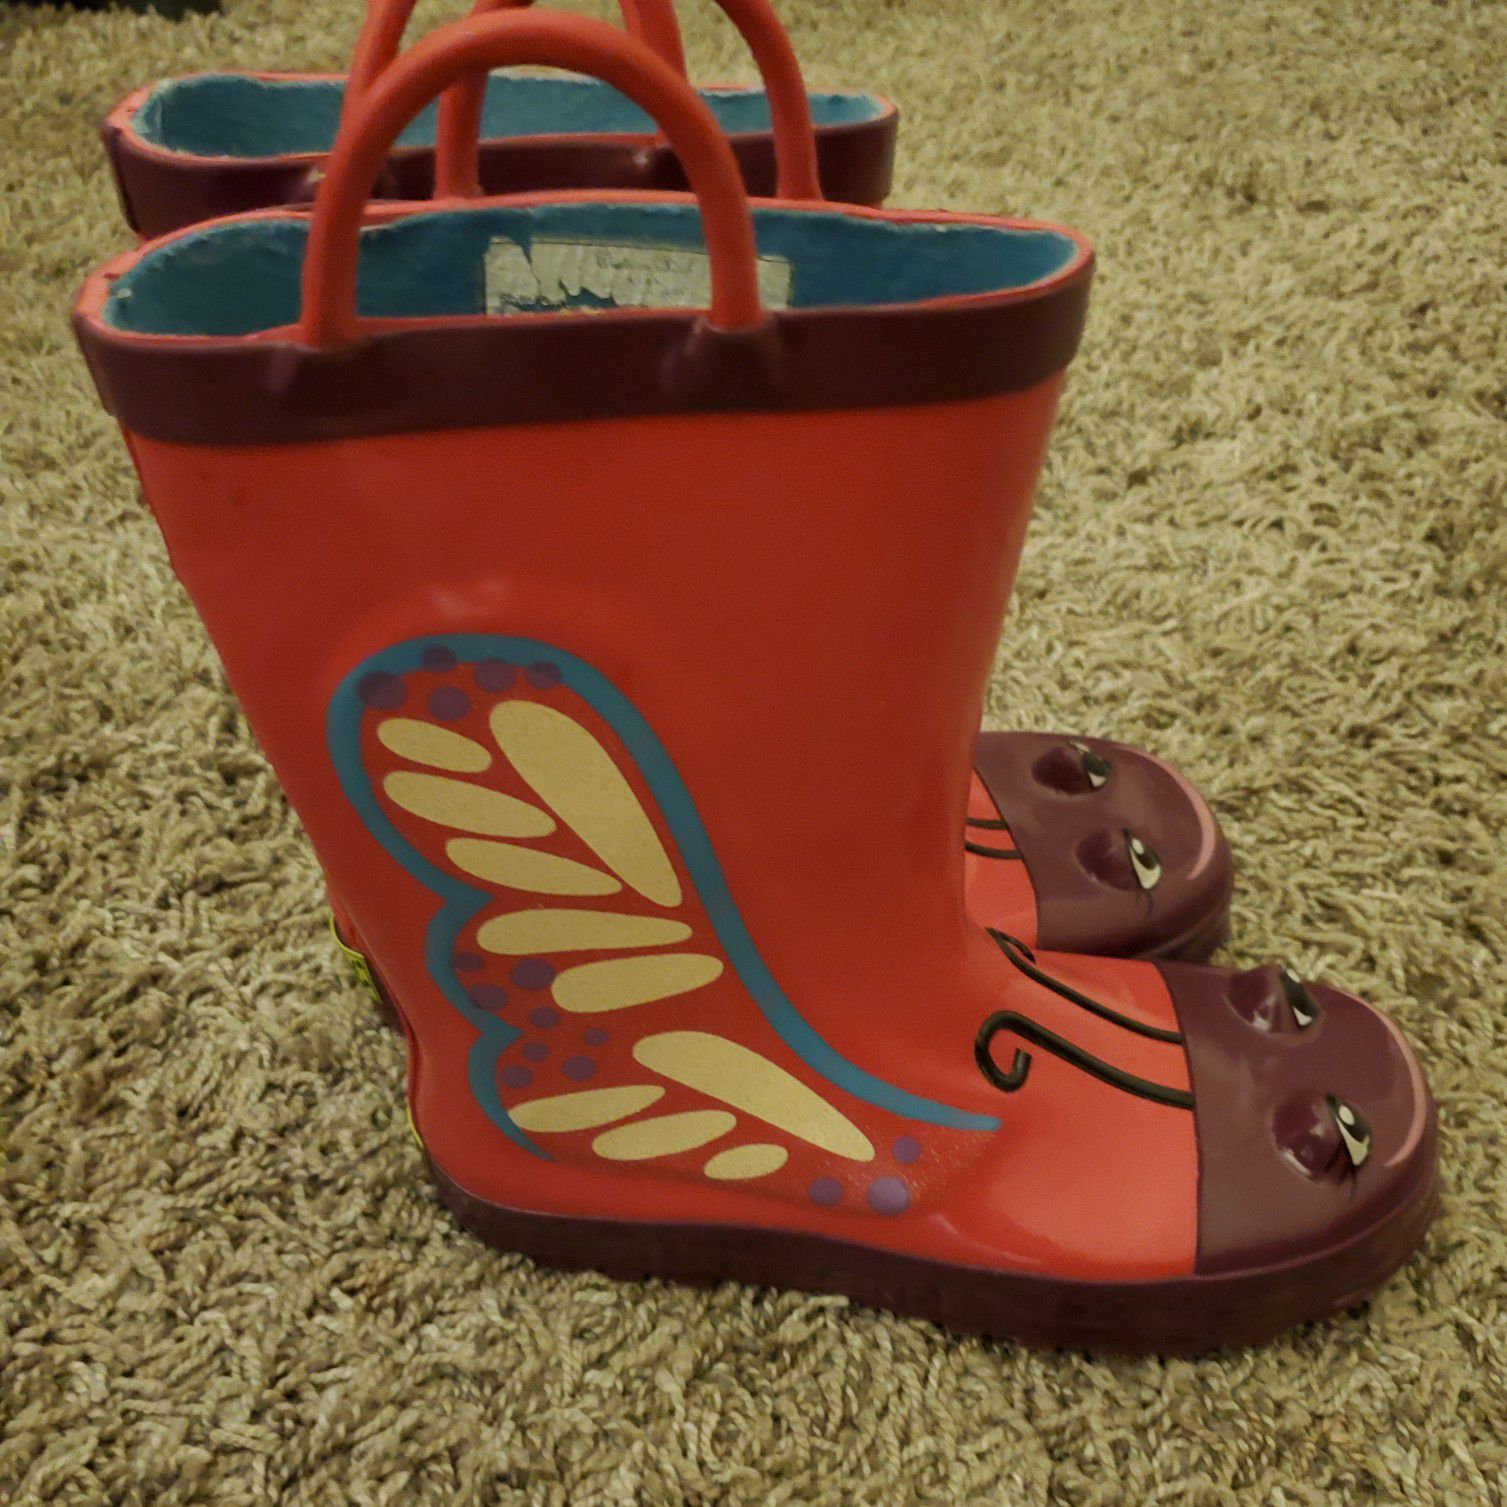 butterfly rain boots garden boots kids size 3 Free if buying any other items.